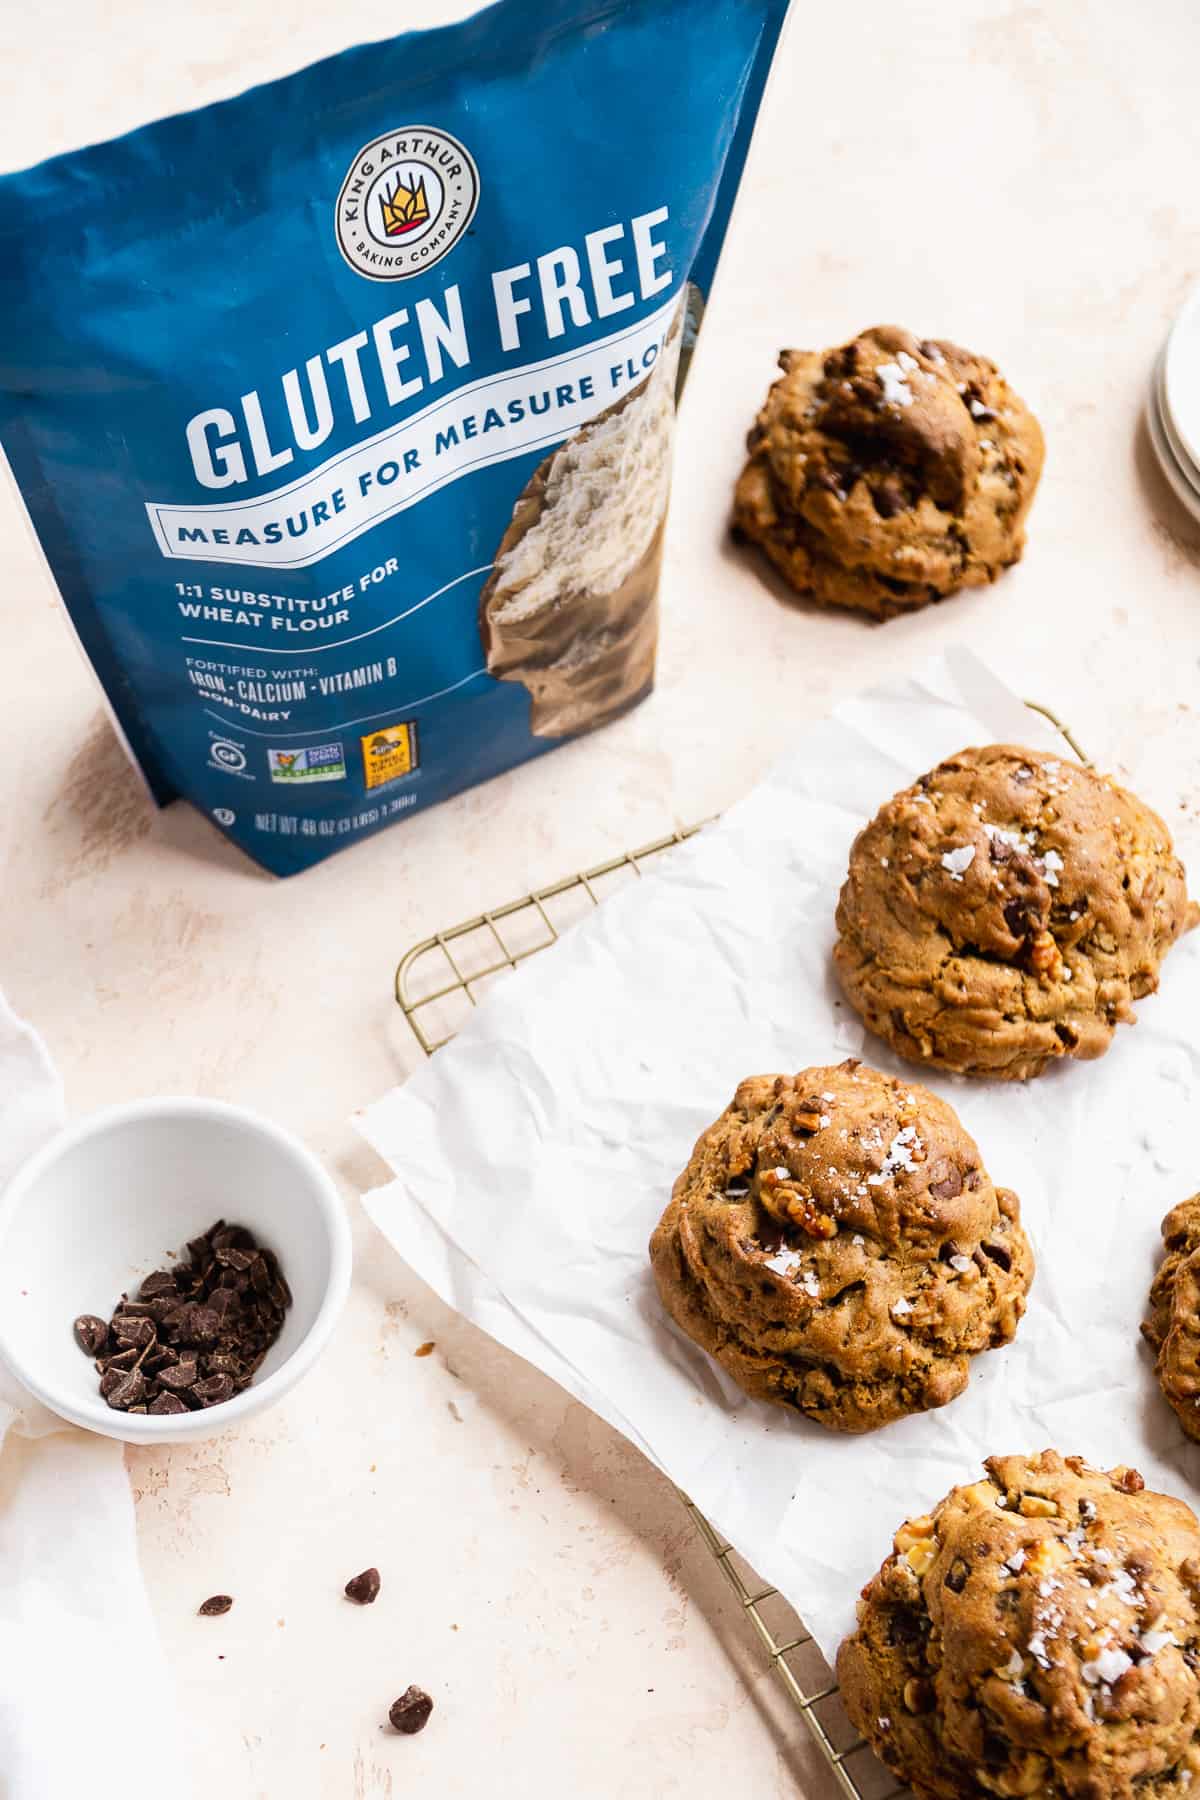 Chunky bakery style cookies on a cooling rack with a bag of gluten free flour next to the side.